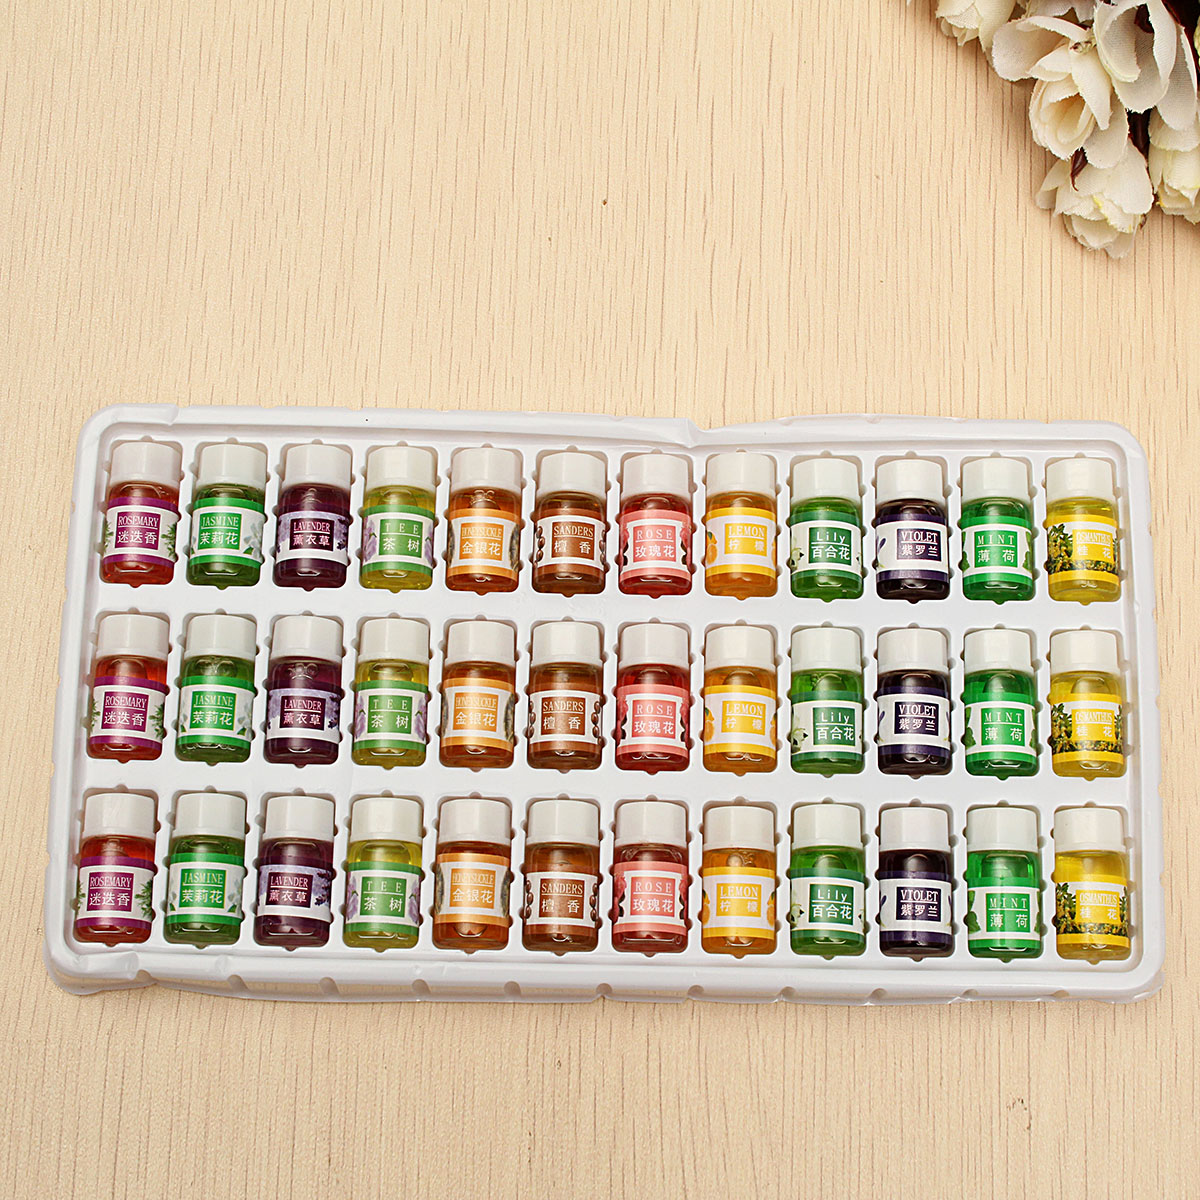 36pcs-Pure-Lavender-Aromatherapy-Humidifier-Essential-Oils-Spa-Water-Soluble-Aroma-Oil-Set-1085303